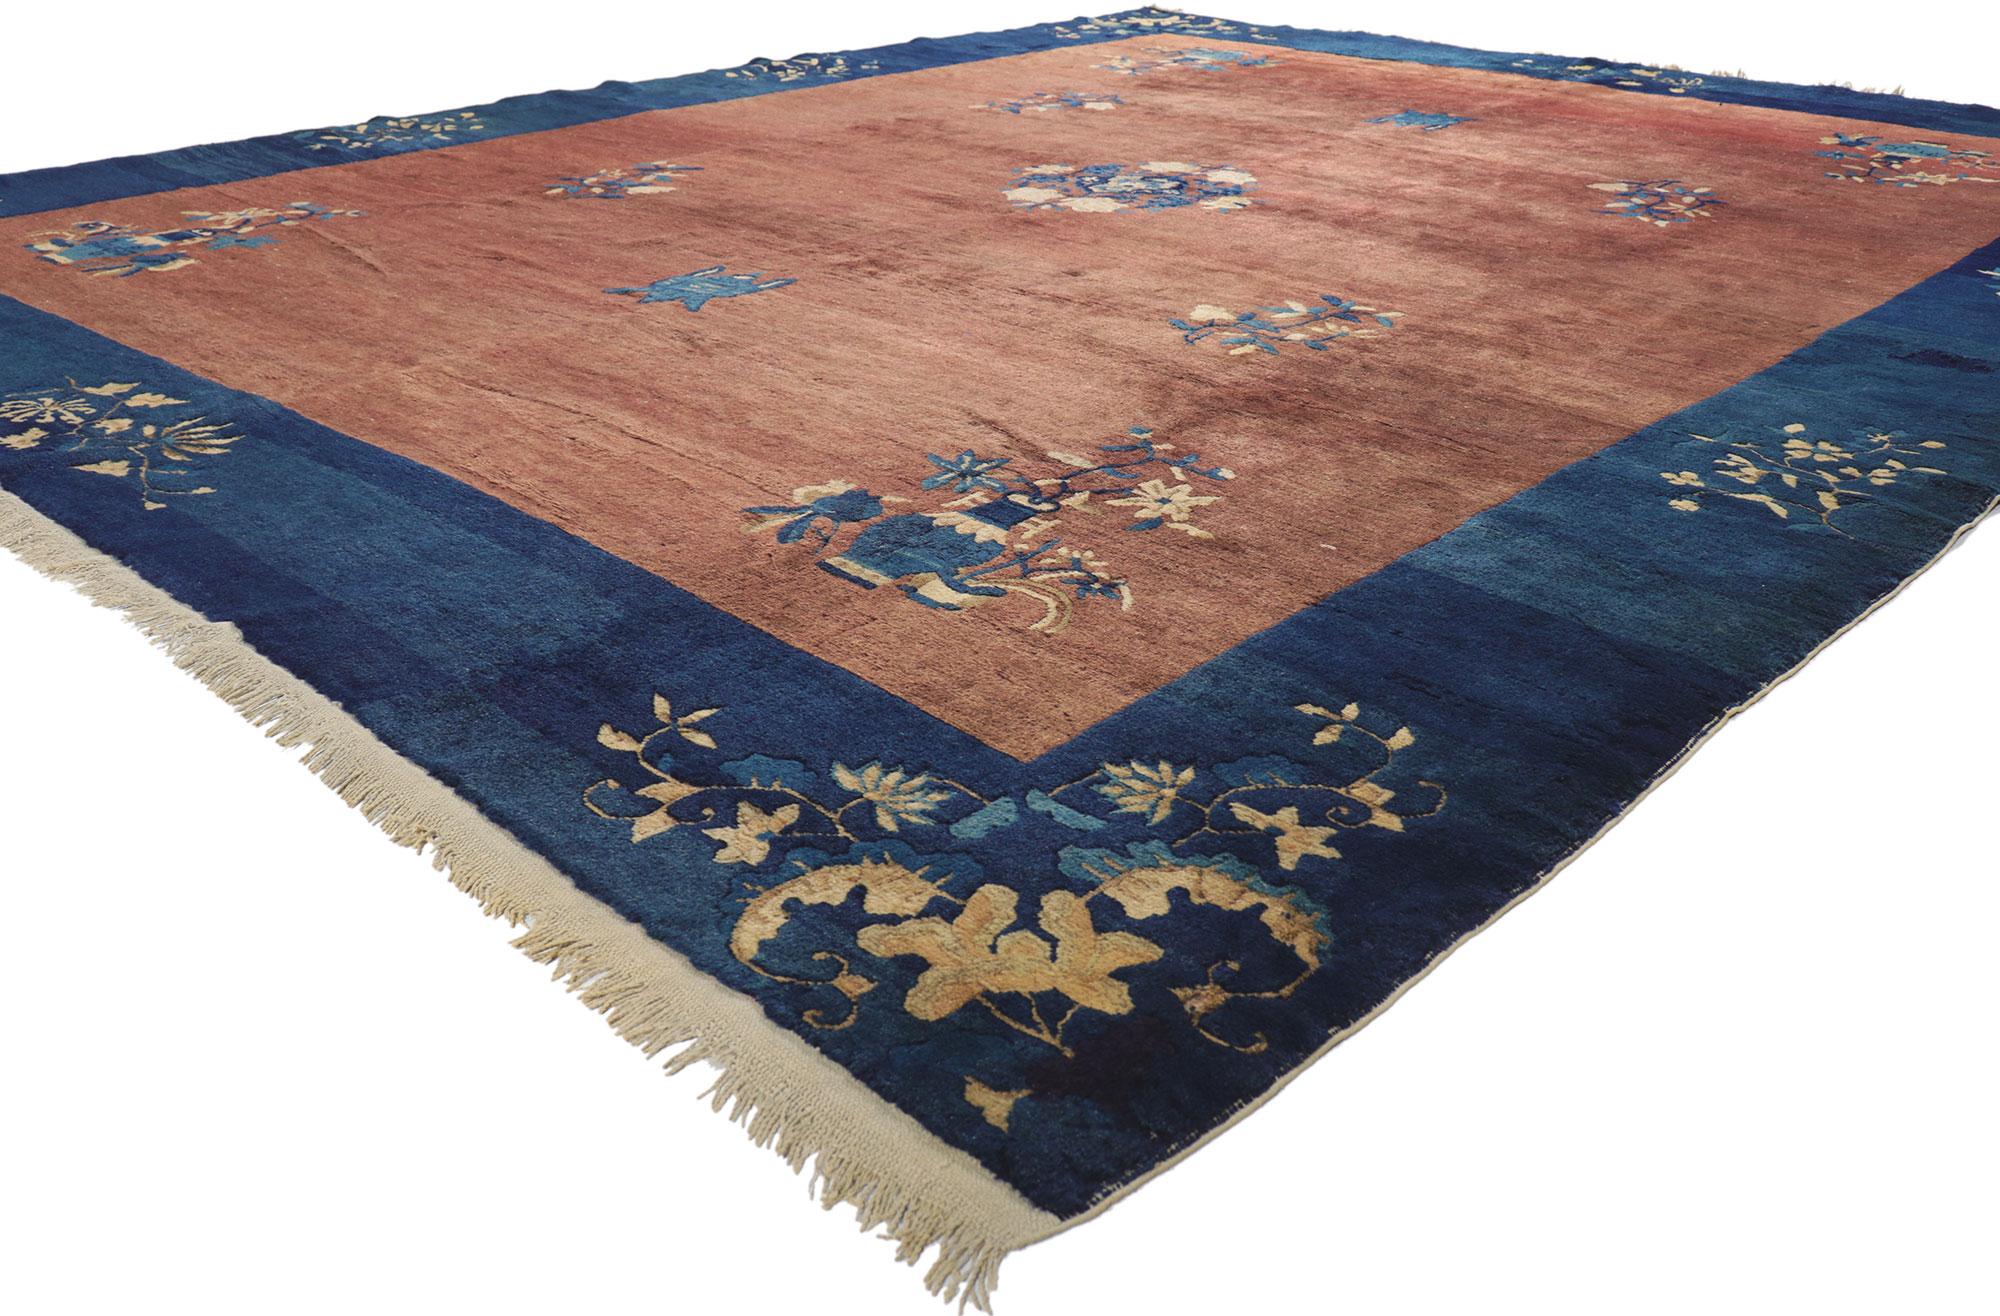 78422 Antique Chinese Peking Rug, 09'00 x 11'02. 
Chinoiserie chic meets earth-tone elegance in this hand knotted wool antique Chinese Peking rug. The decorative floral vase design and earthy hues woven into this piece work together creating a